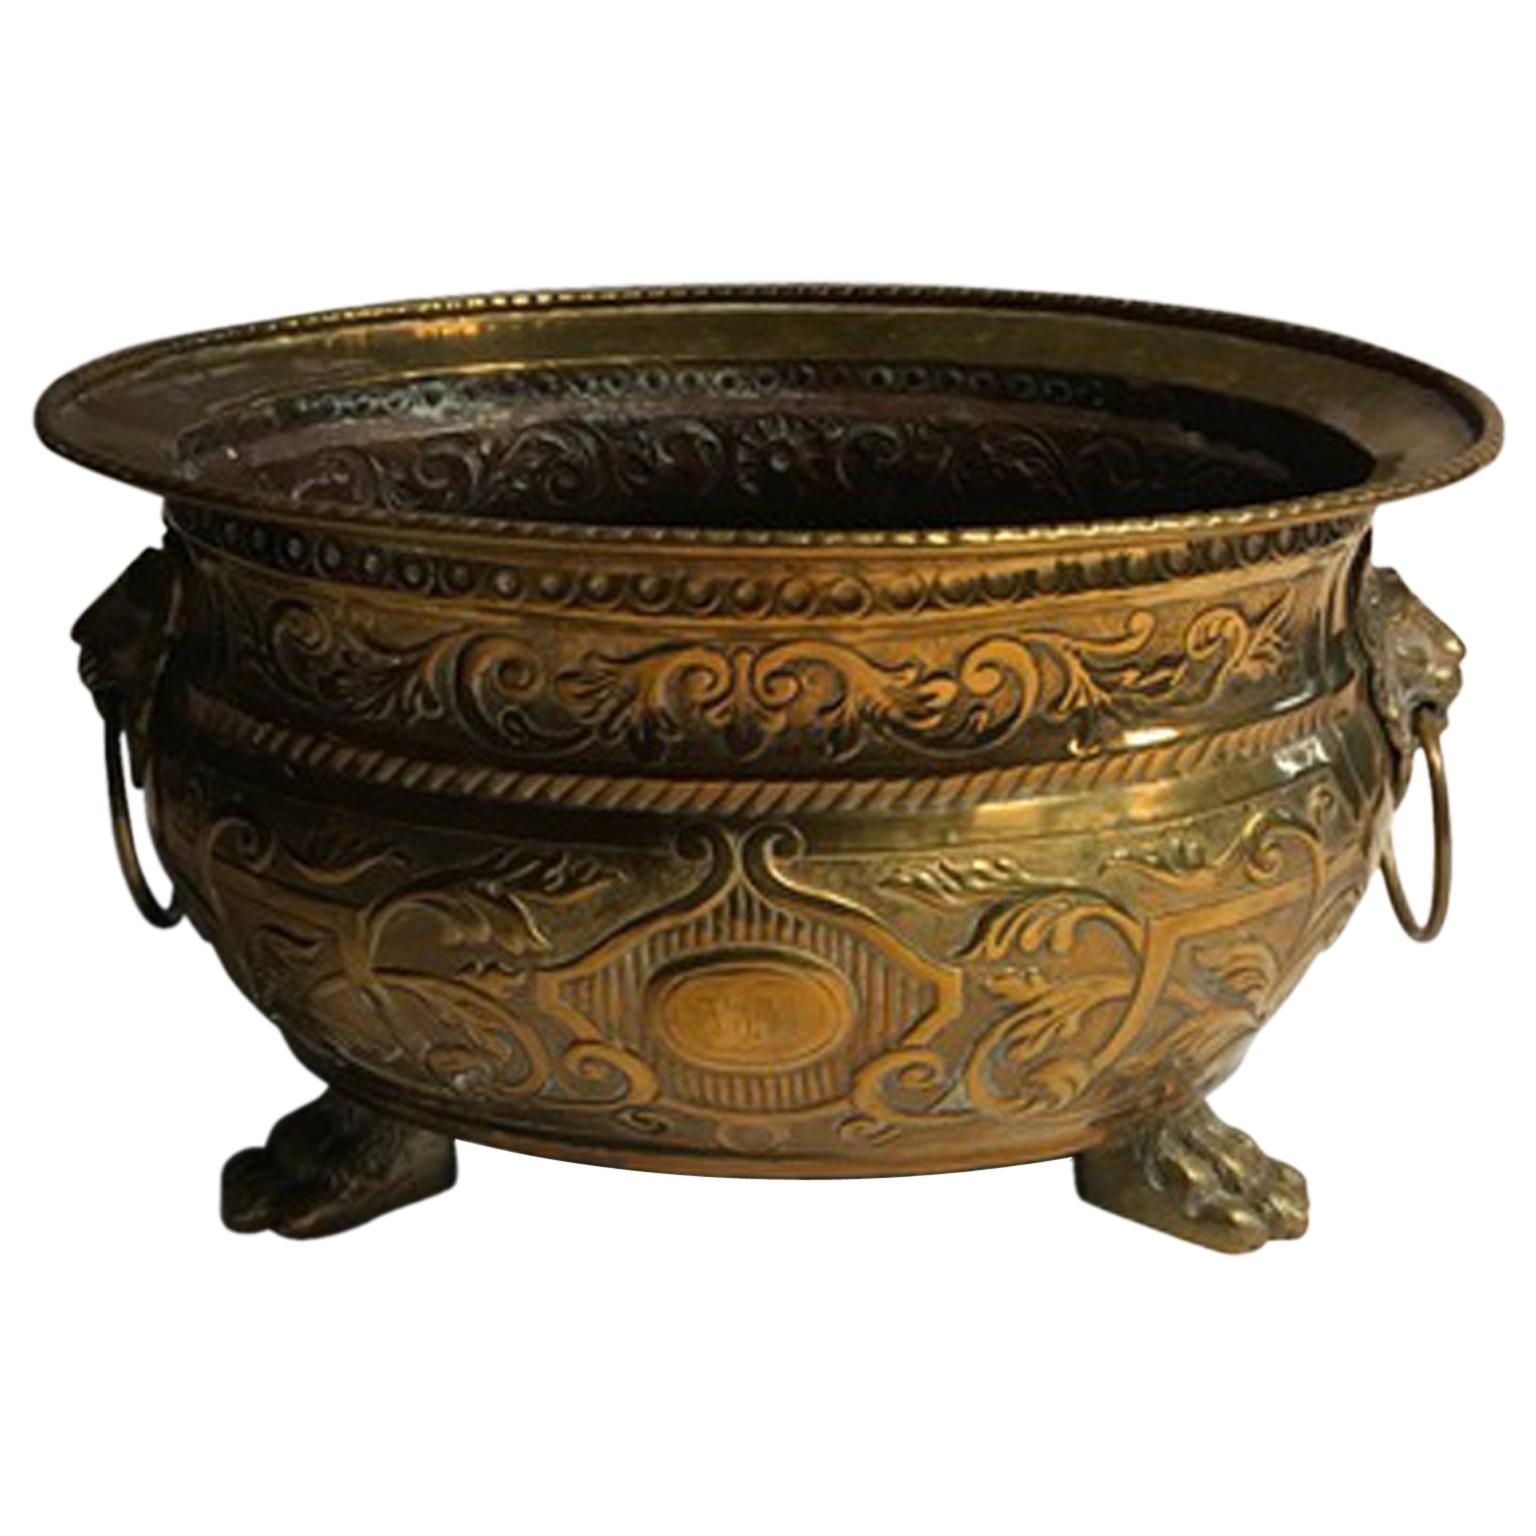  Early 20th Century Italy Brass Planter Bowl with Lions Heads